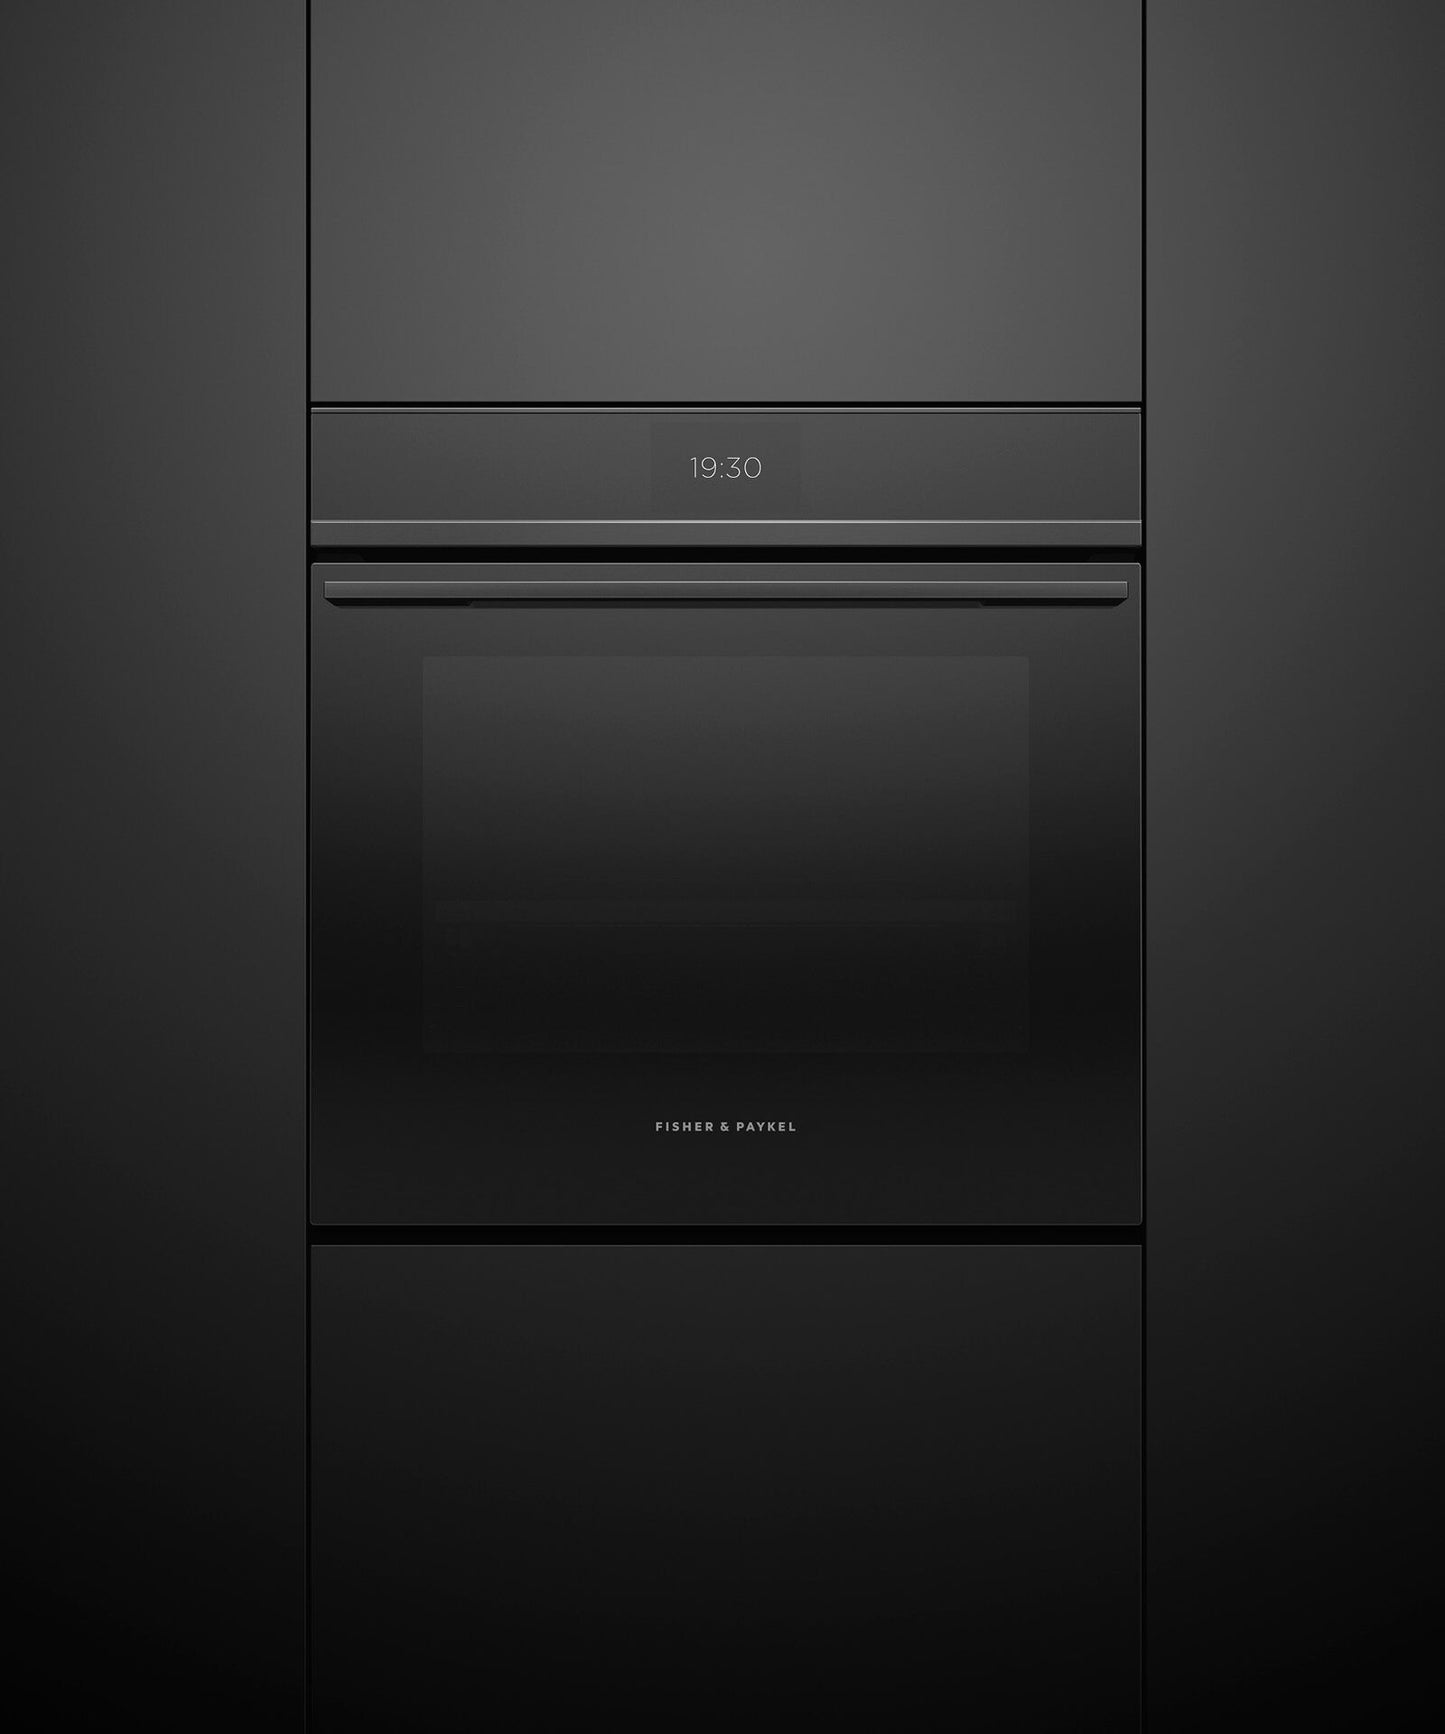 Fisher & Paykel OB24SDPTB1 Oven, 24", 16 Function, Self-Cleaning